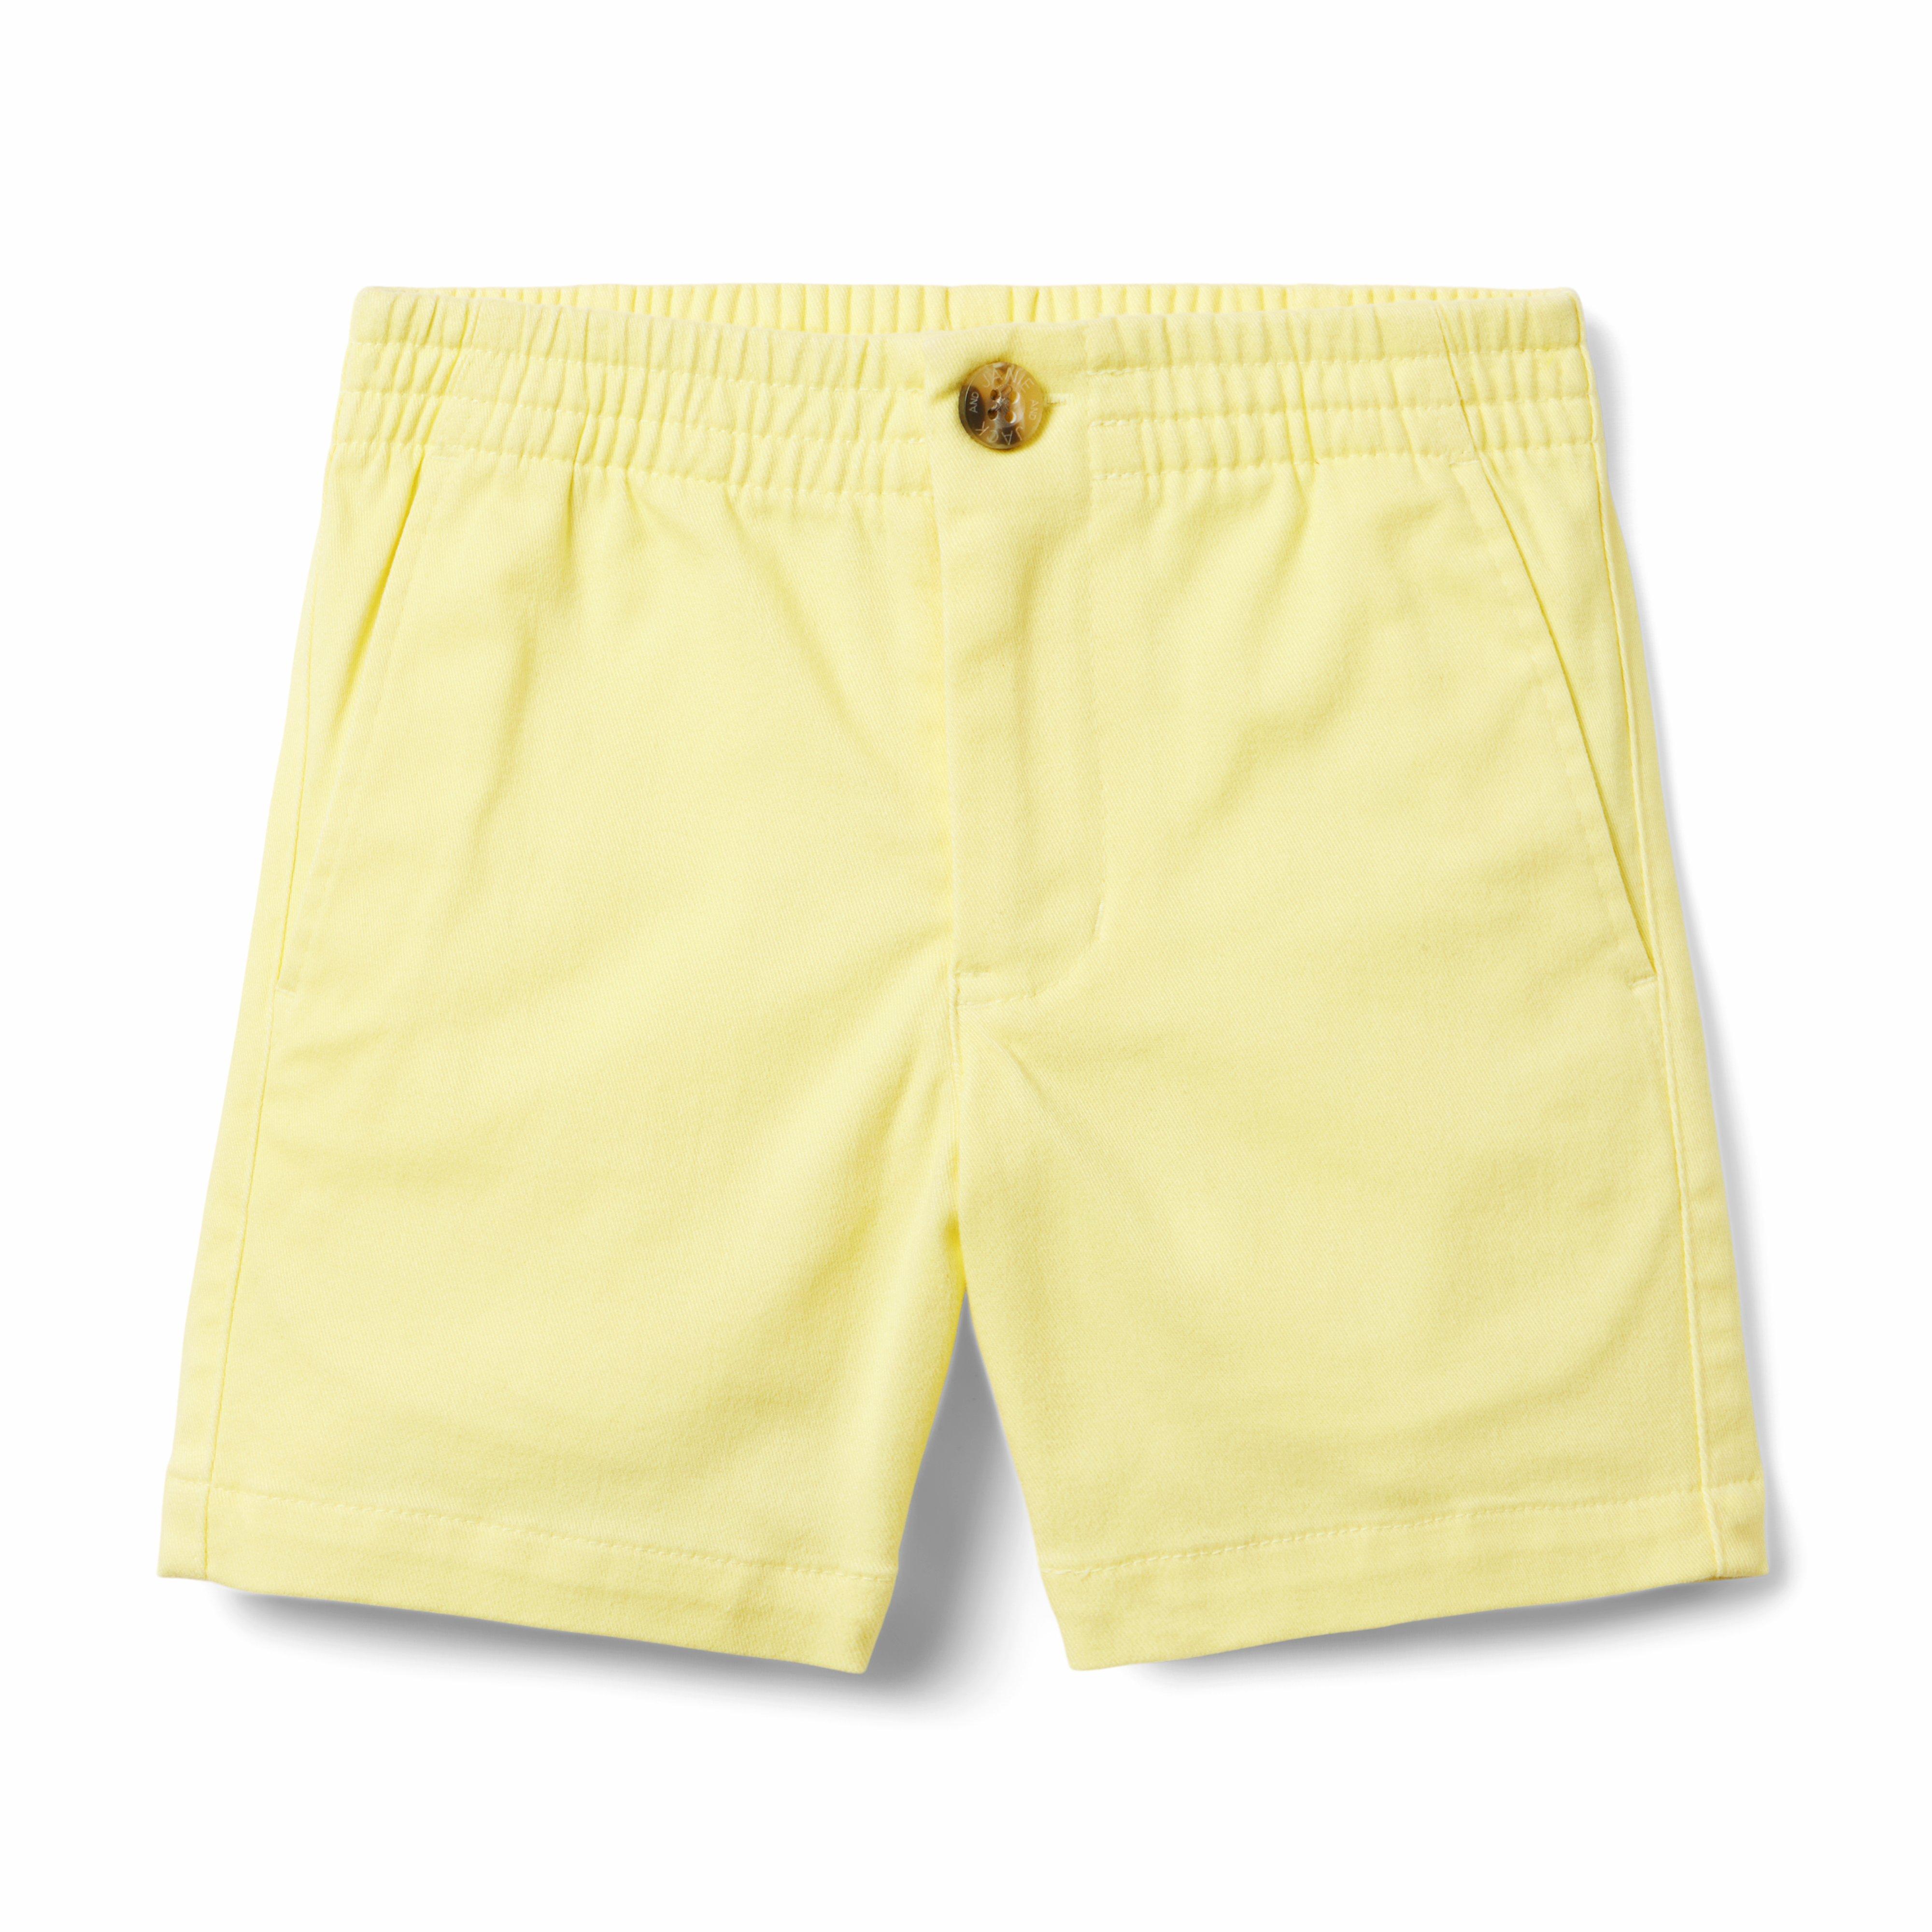 The Twill Pull-On Short